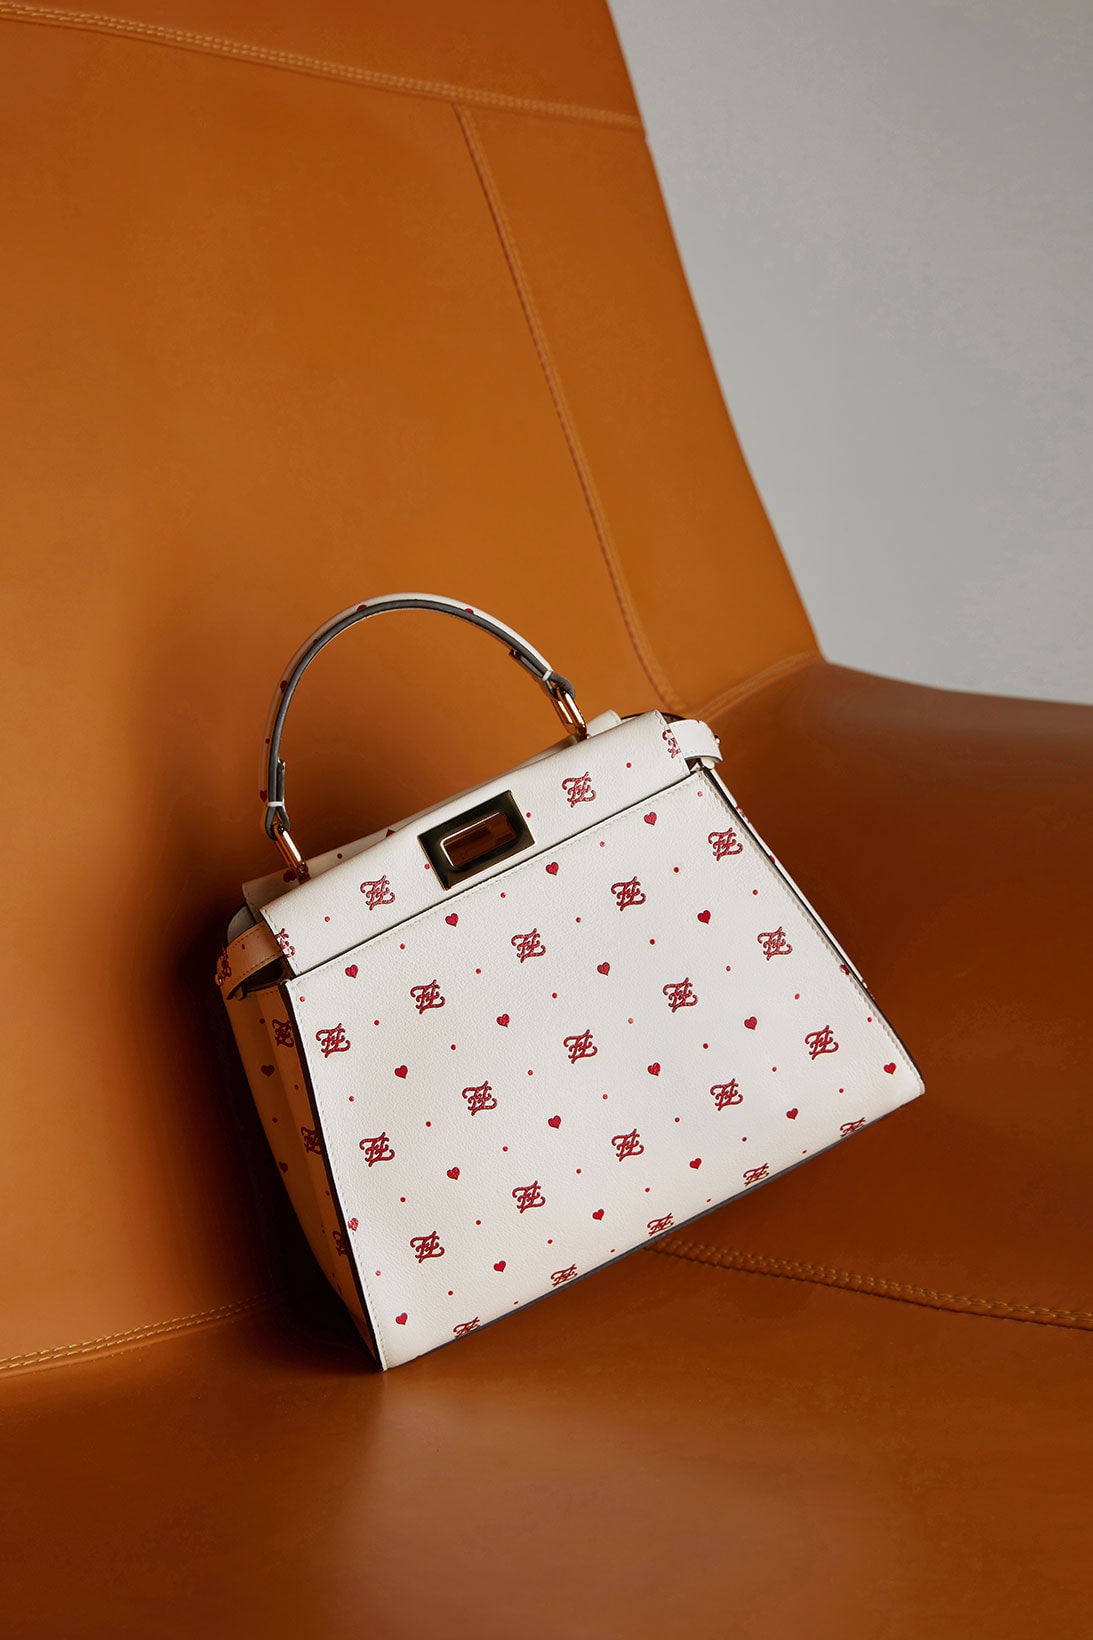 Louis vuitton just released one of their valentines day collection